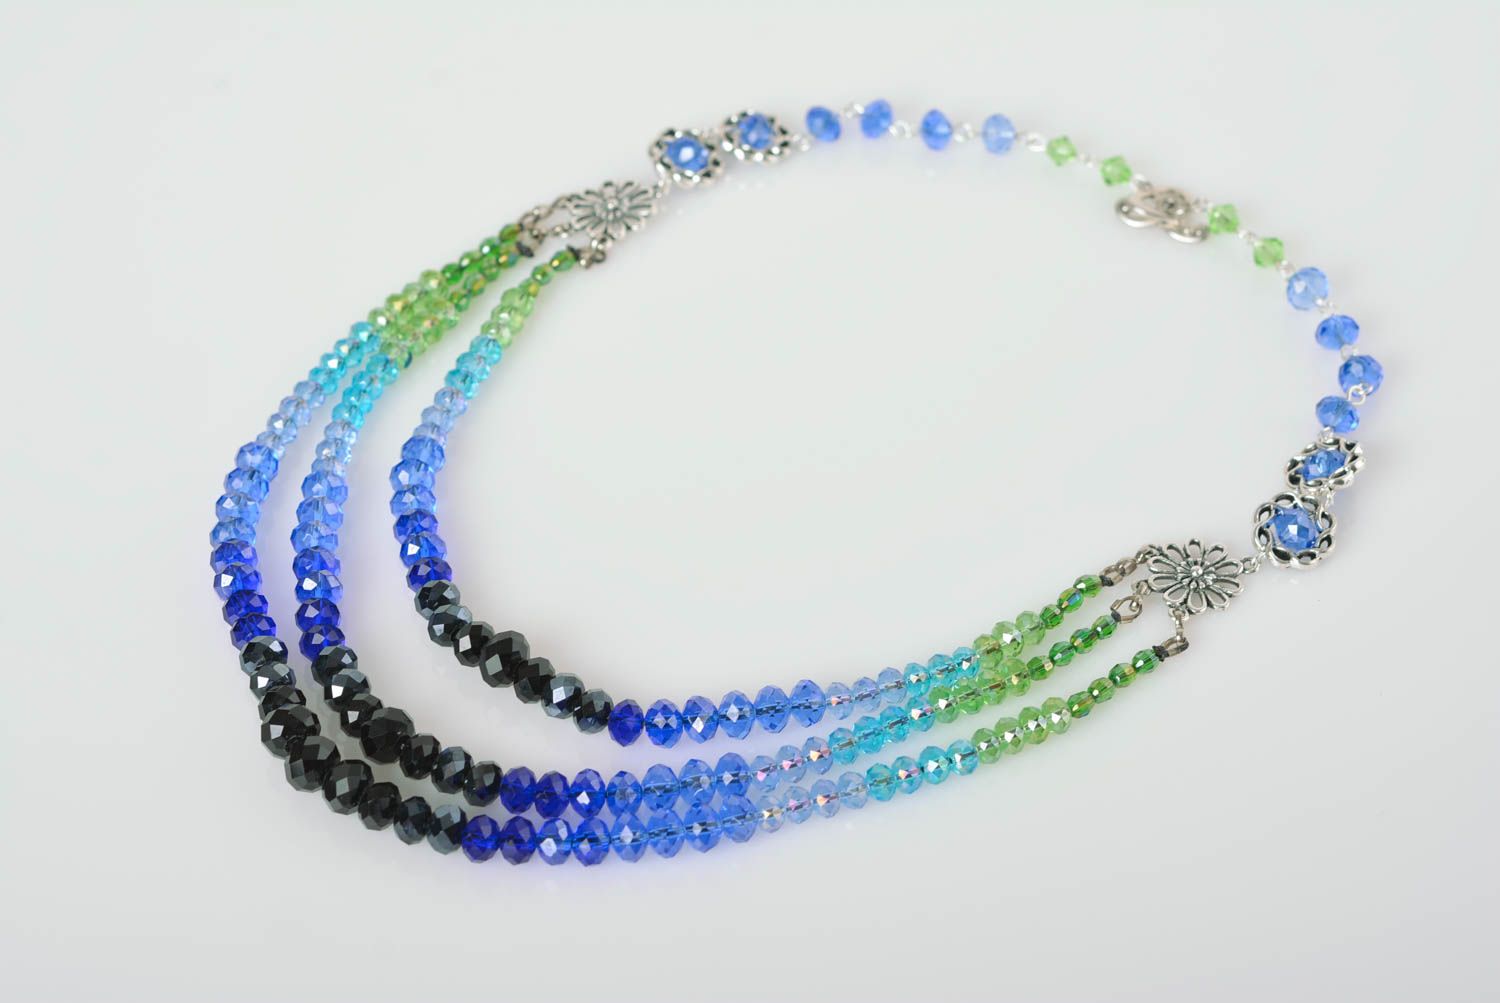 Beautiful handmade beaded necklace glass bead necklace cool gifts for her photo 1